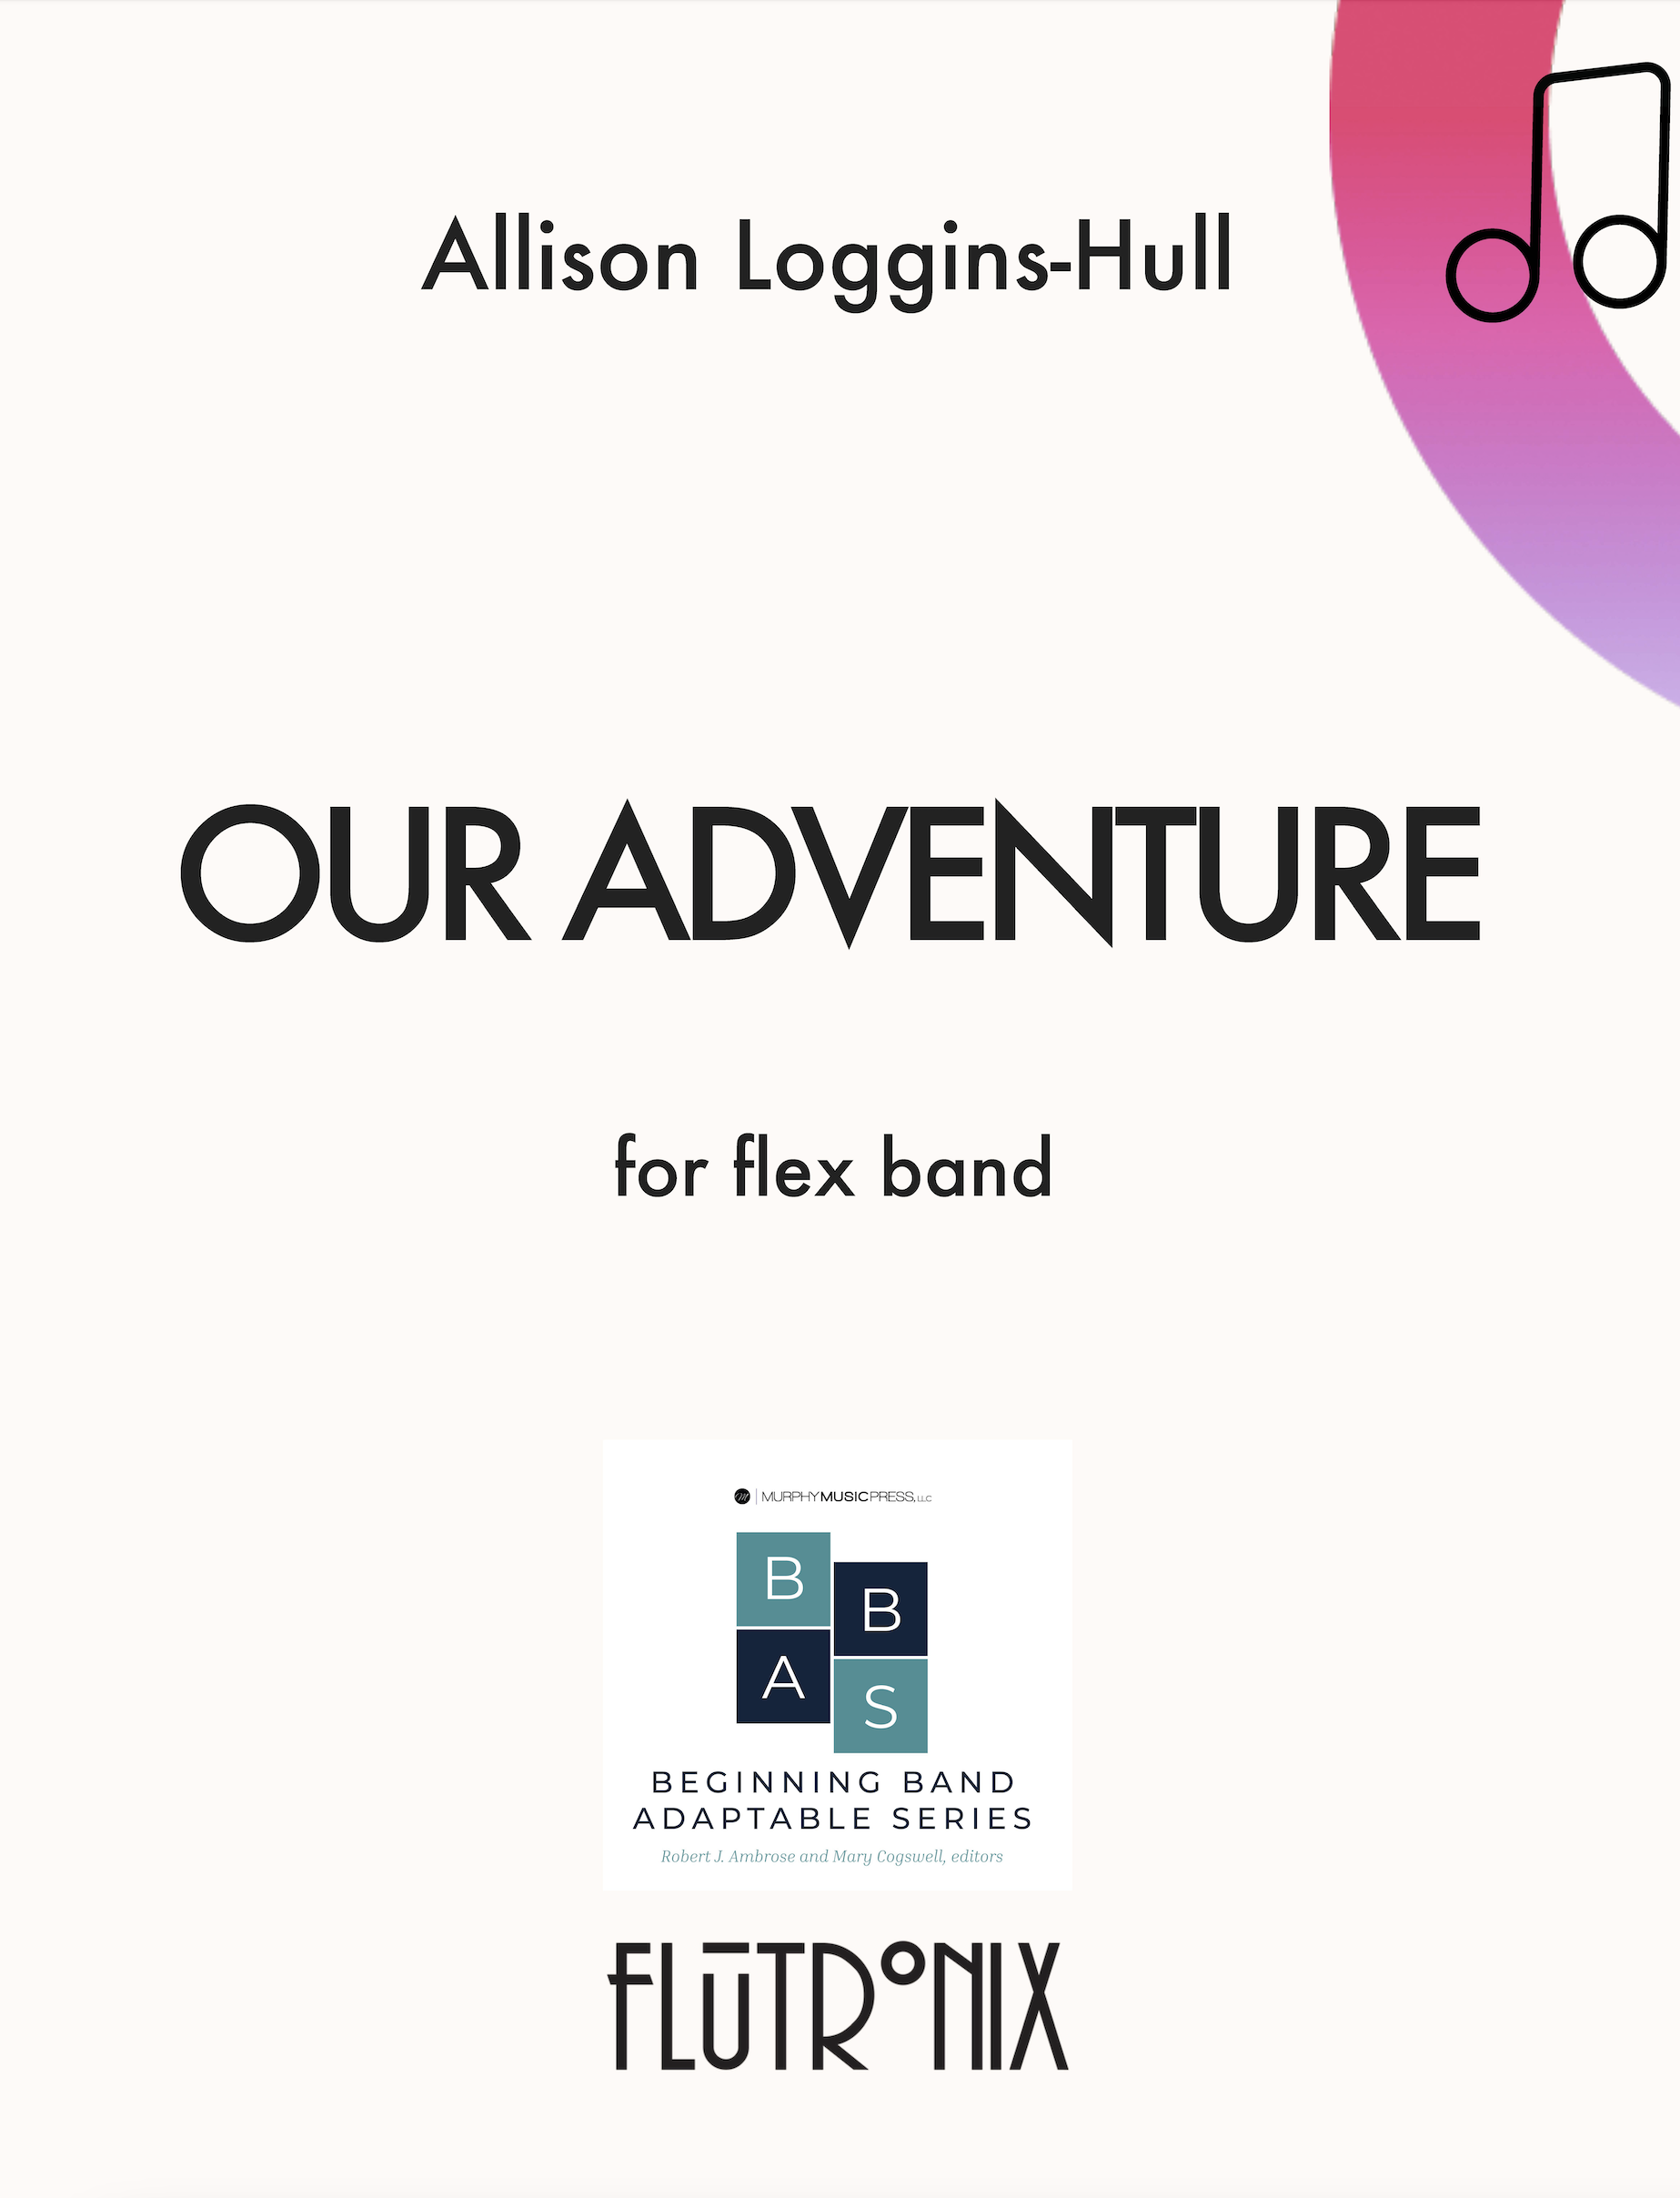 Our Adventure by Allison Loggins-Hull